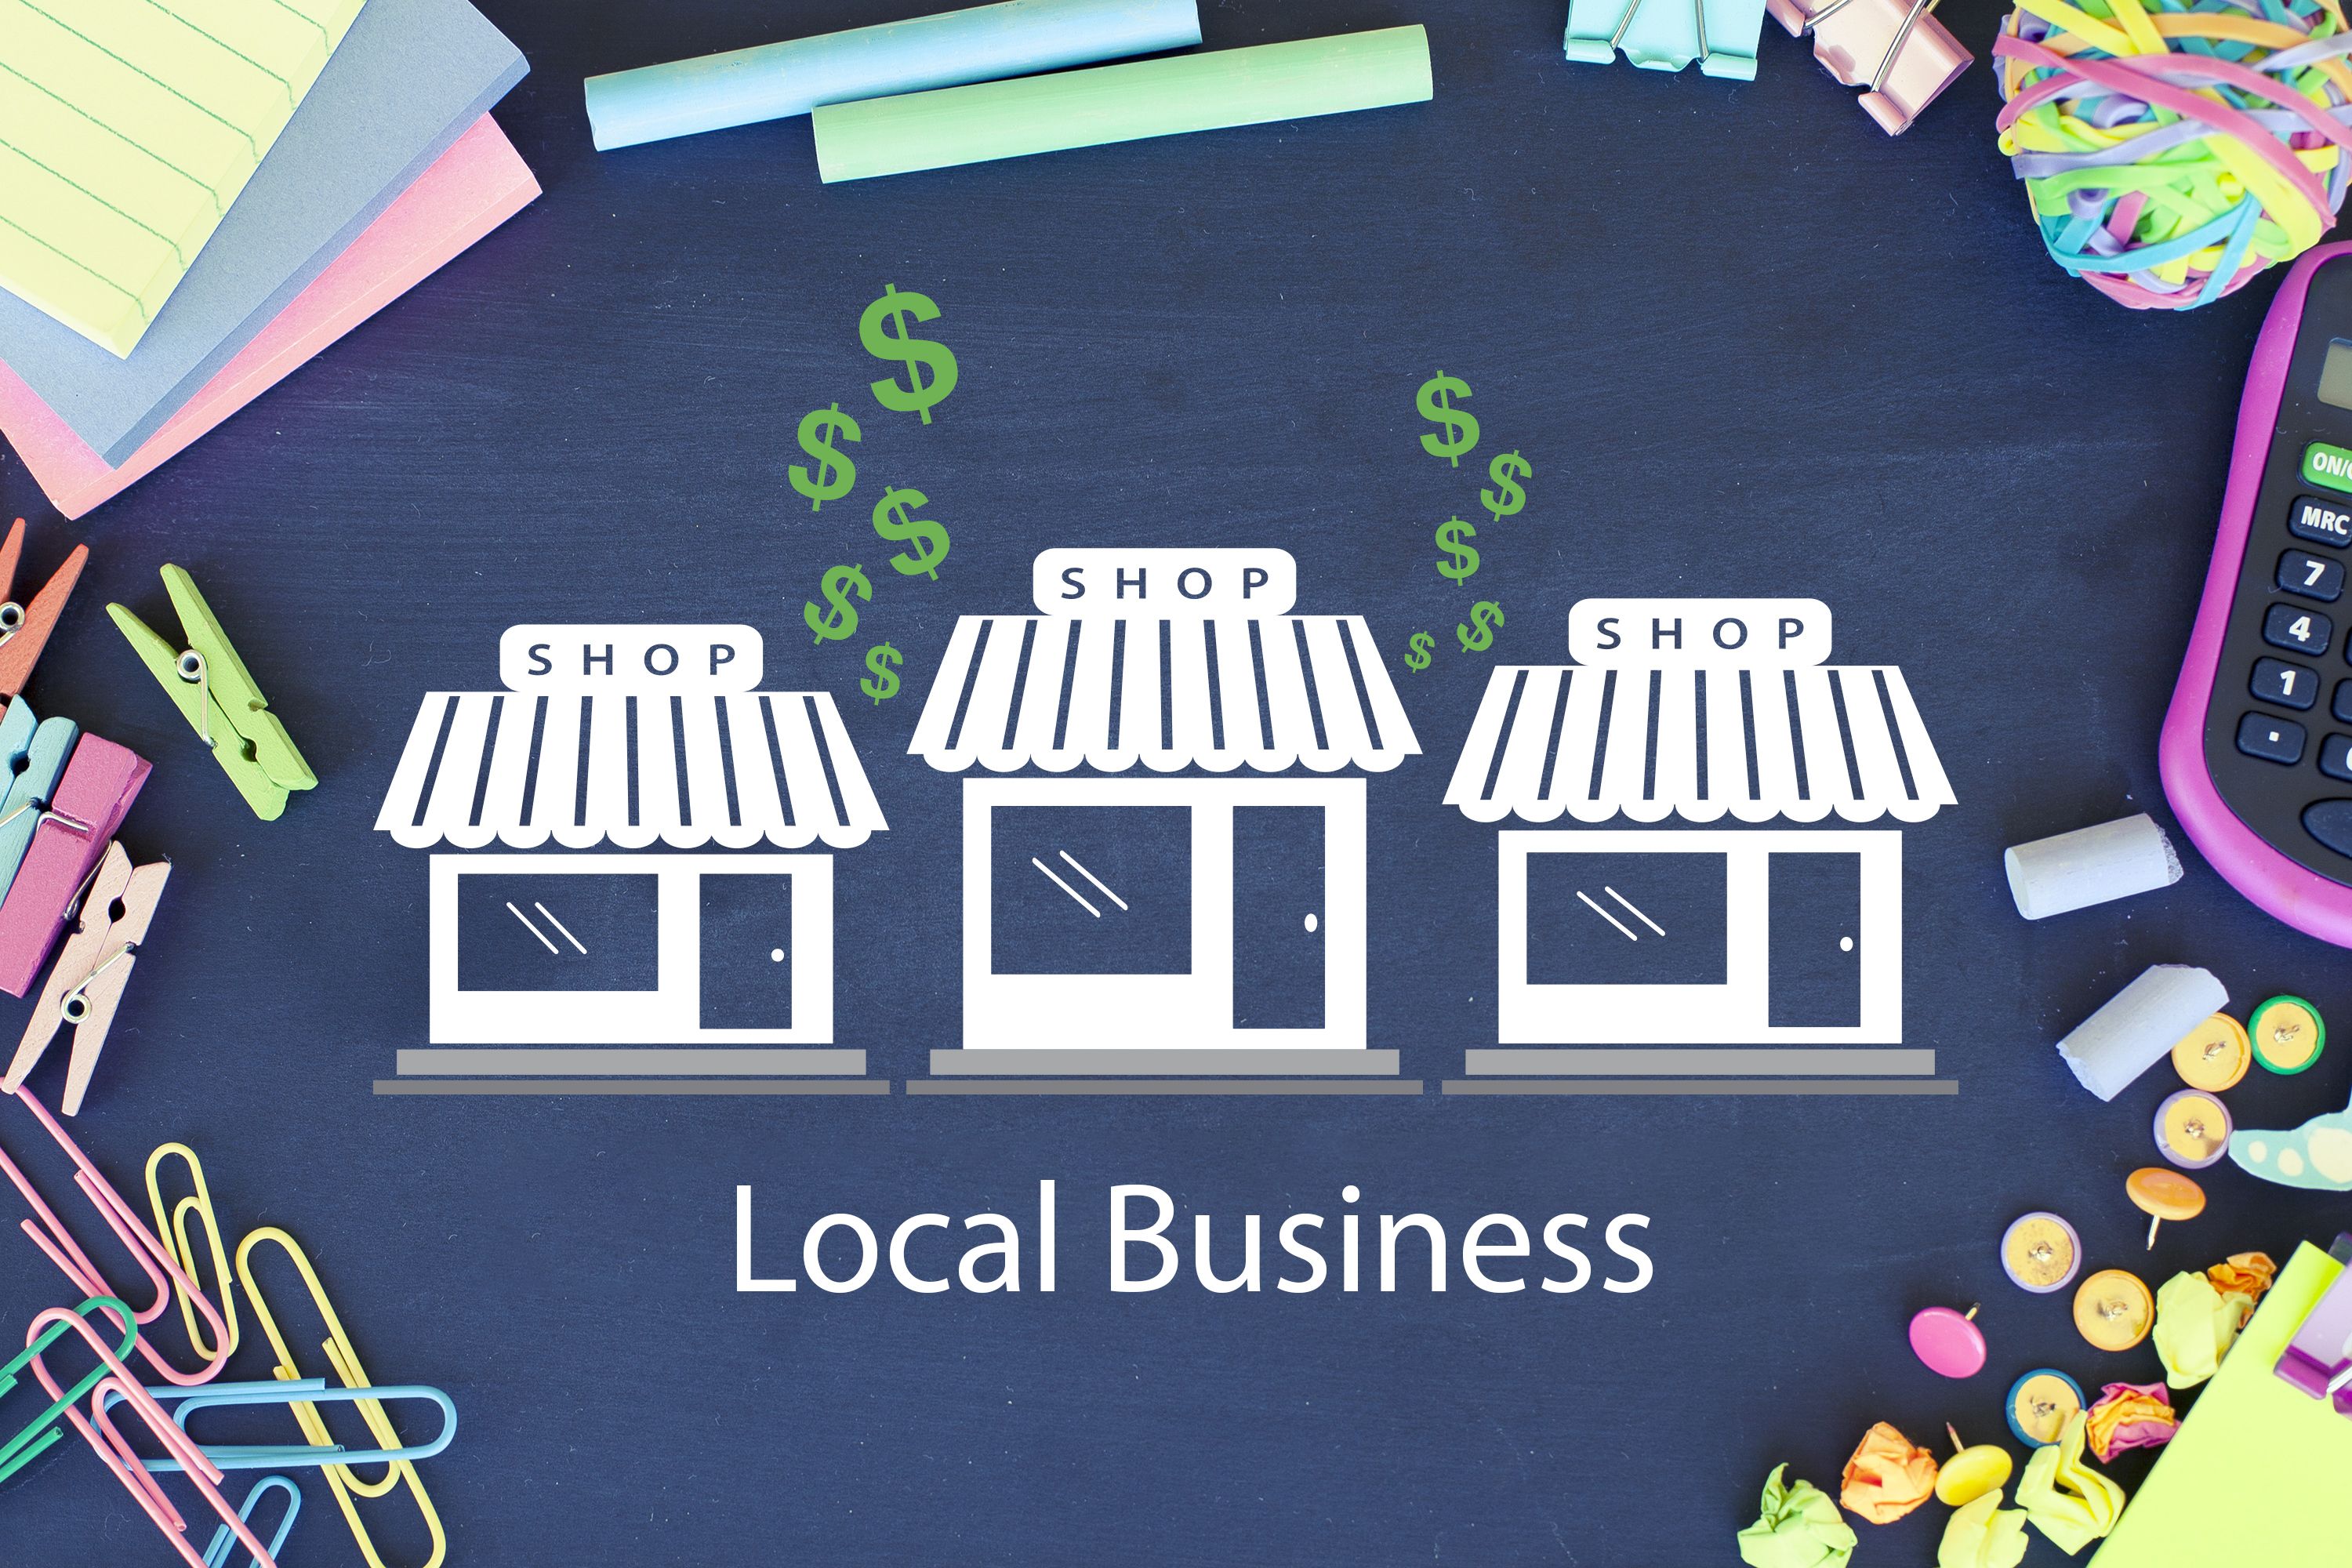 Local Business - Shop Local